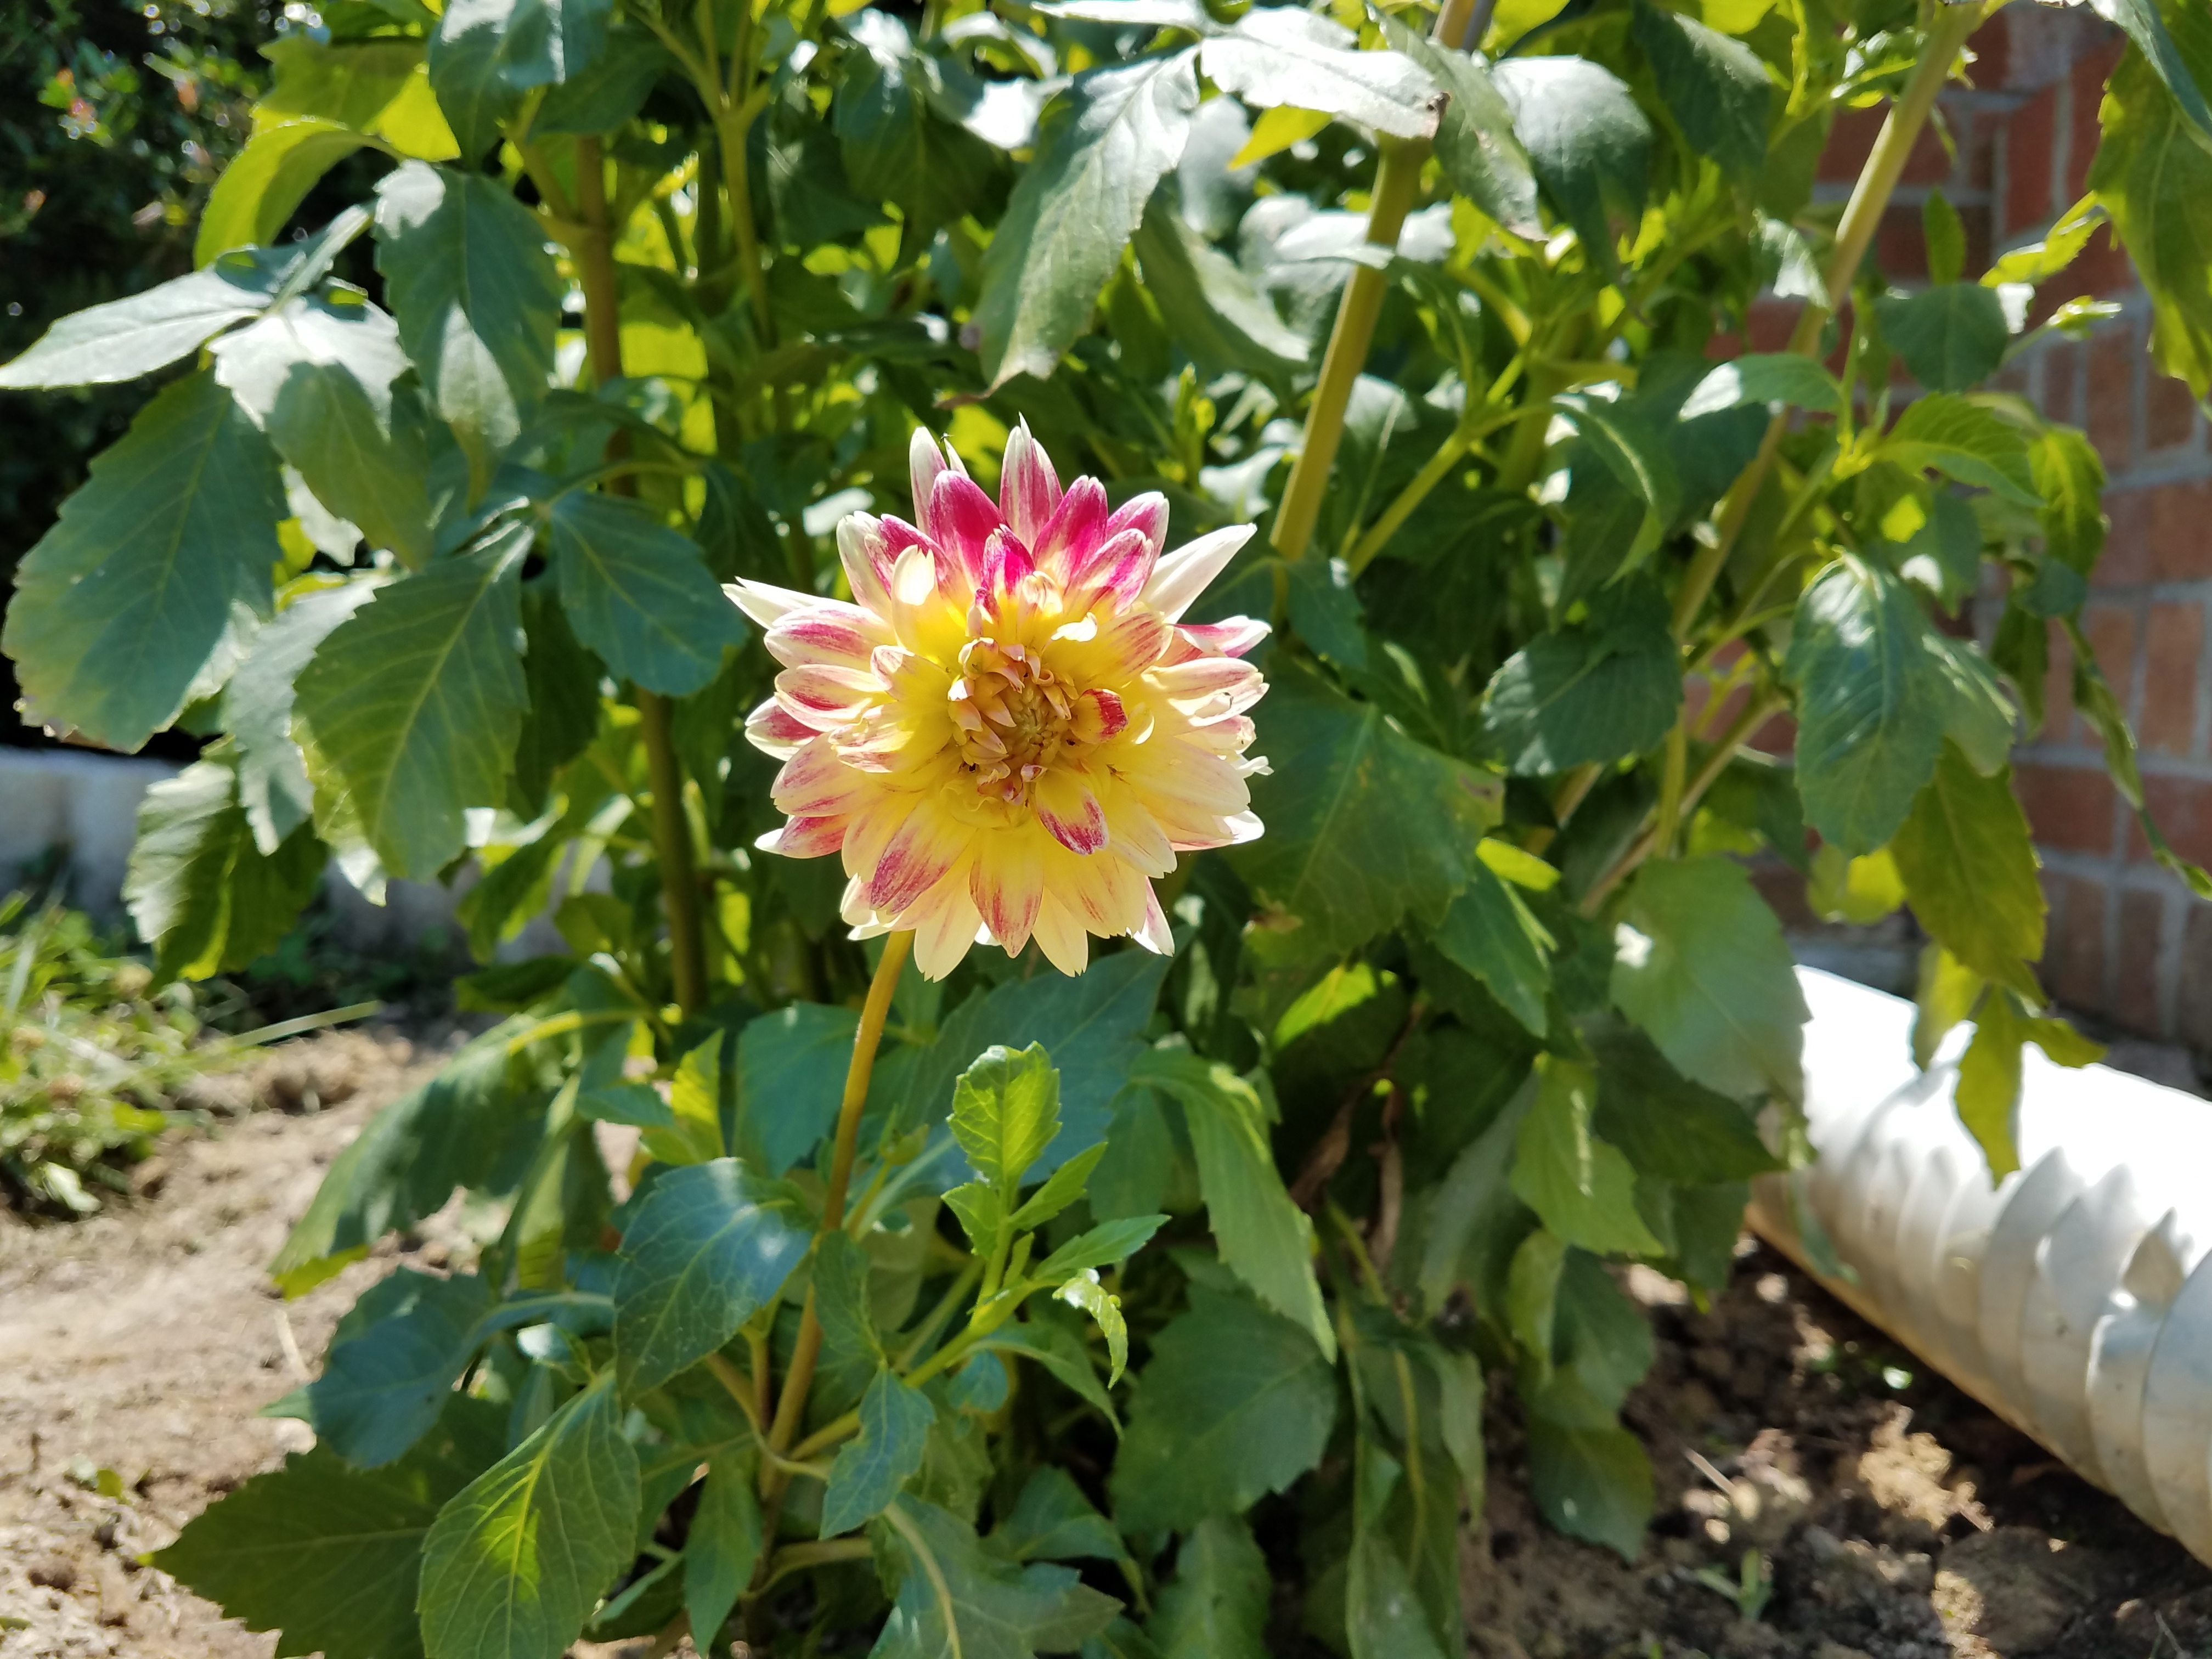 Dahlia plant and lettuce bolting